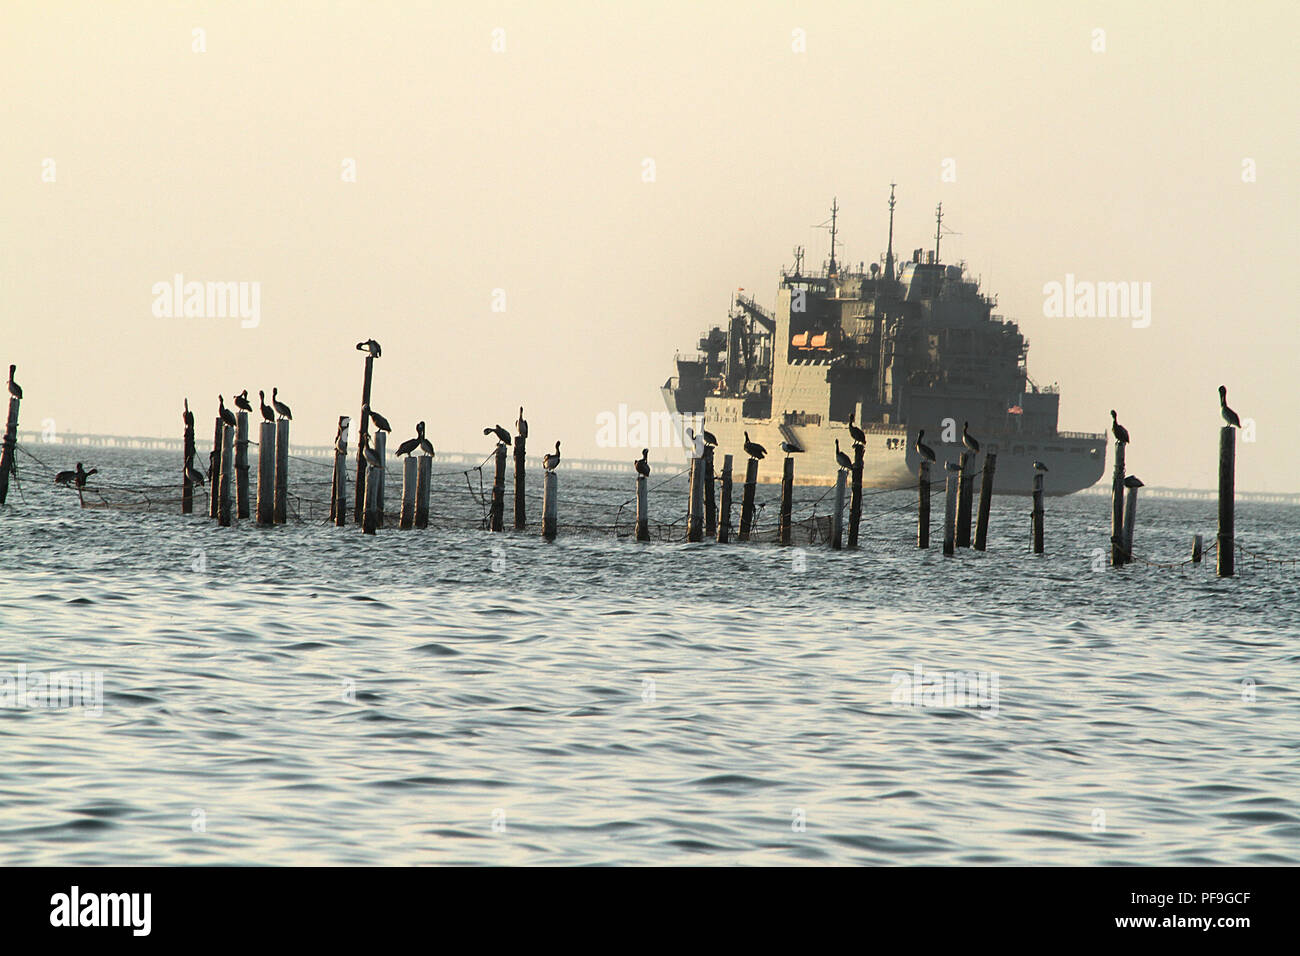 Pelicans on top of poles in the Chesapeake Bay, Virginia Beach, USA. Large military ship in the background. Stock Photo